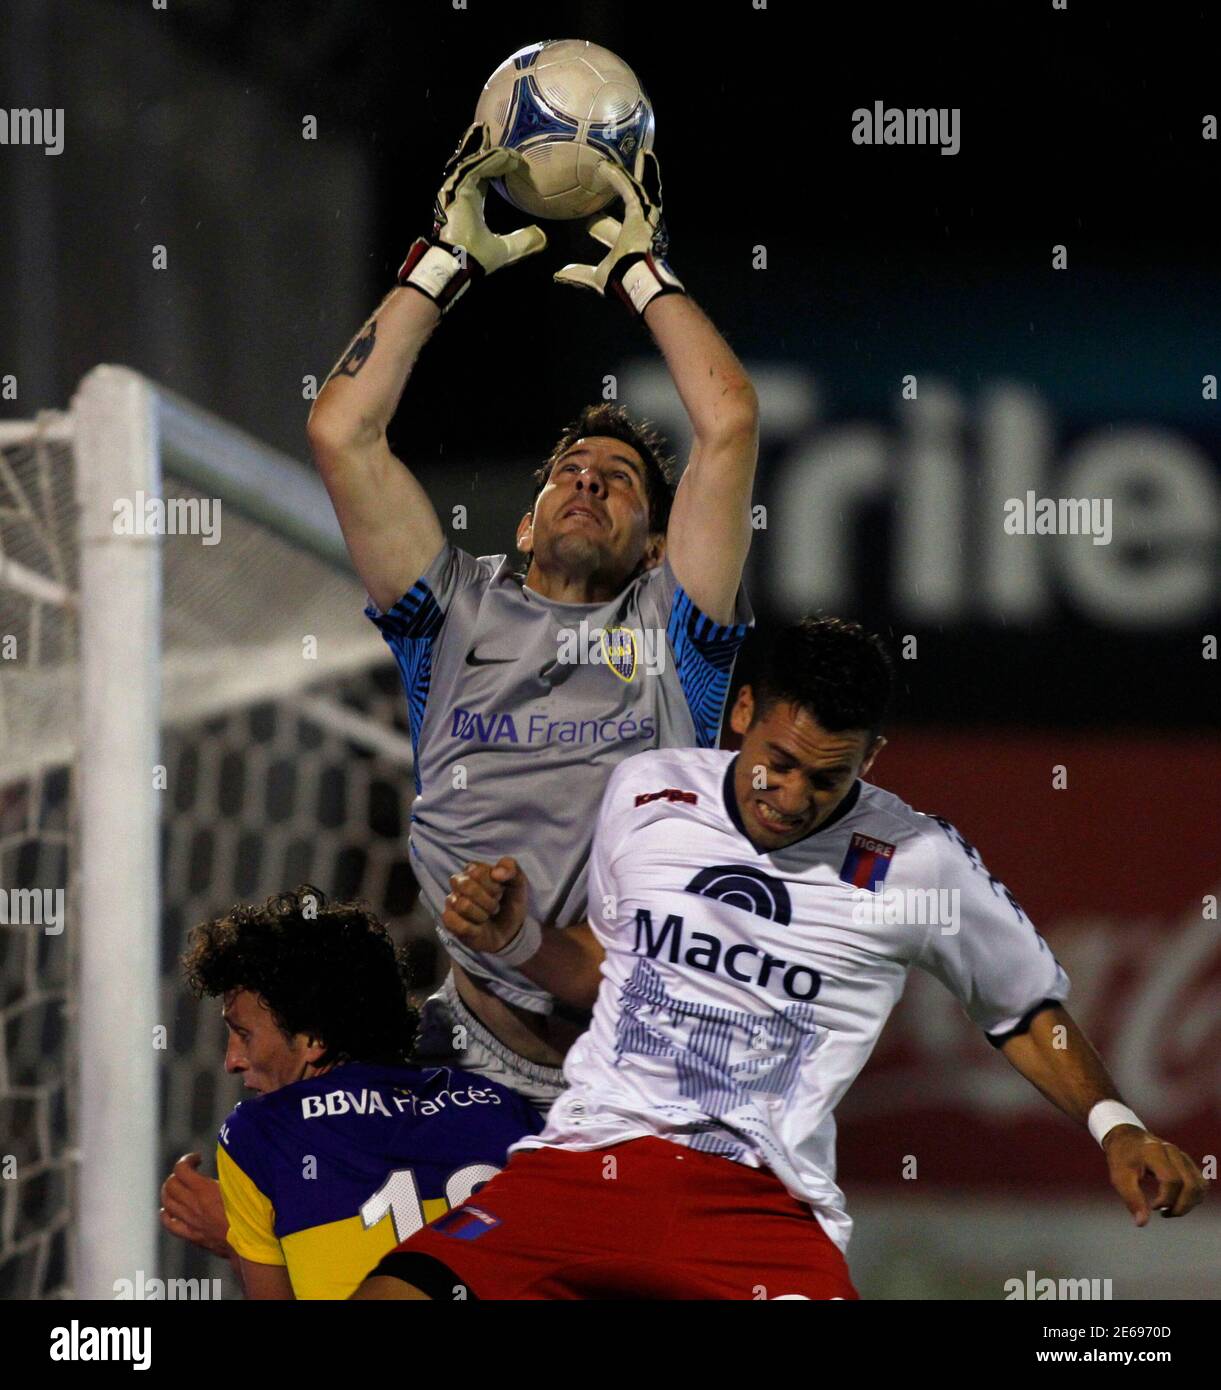 Boca Juniors' goalkeeper Agustin Orion (C) catches the ball next to  teammate Pablo Ledesma (L) and under pressure from Tigre's Matias Escobar  during their Argentine First Division soccer match in Buenos Aires